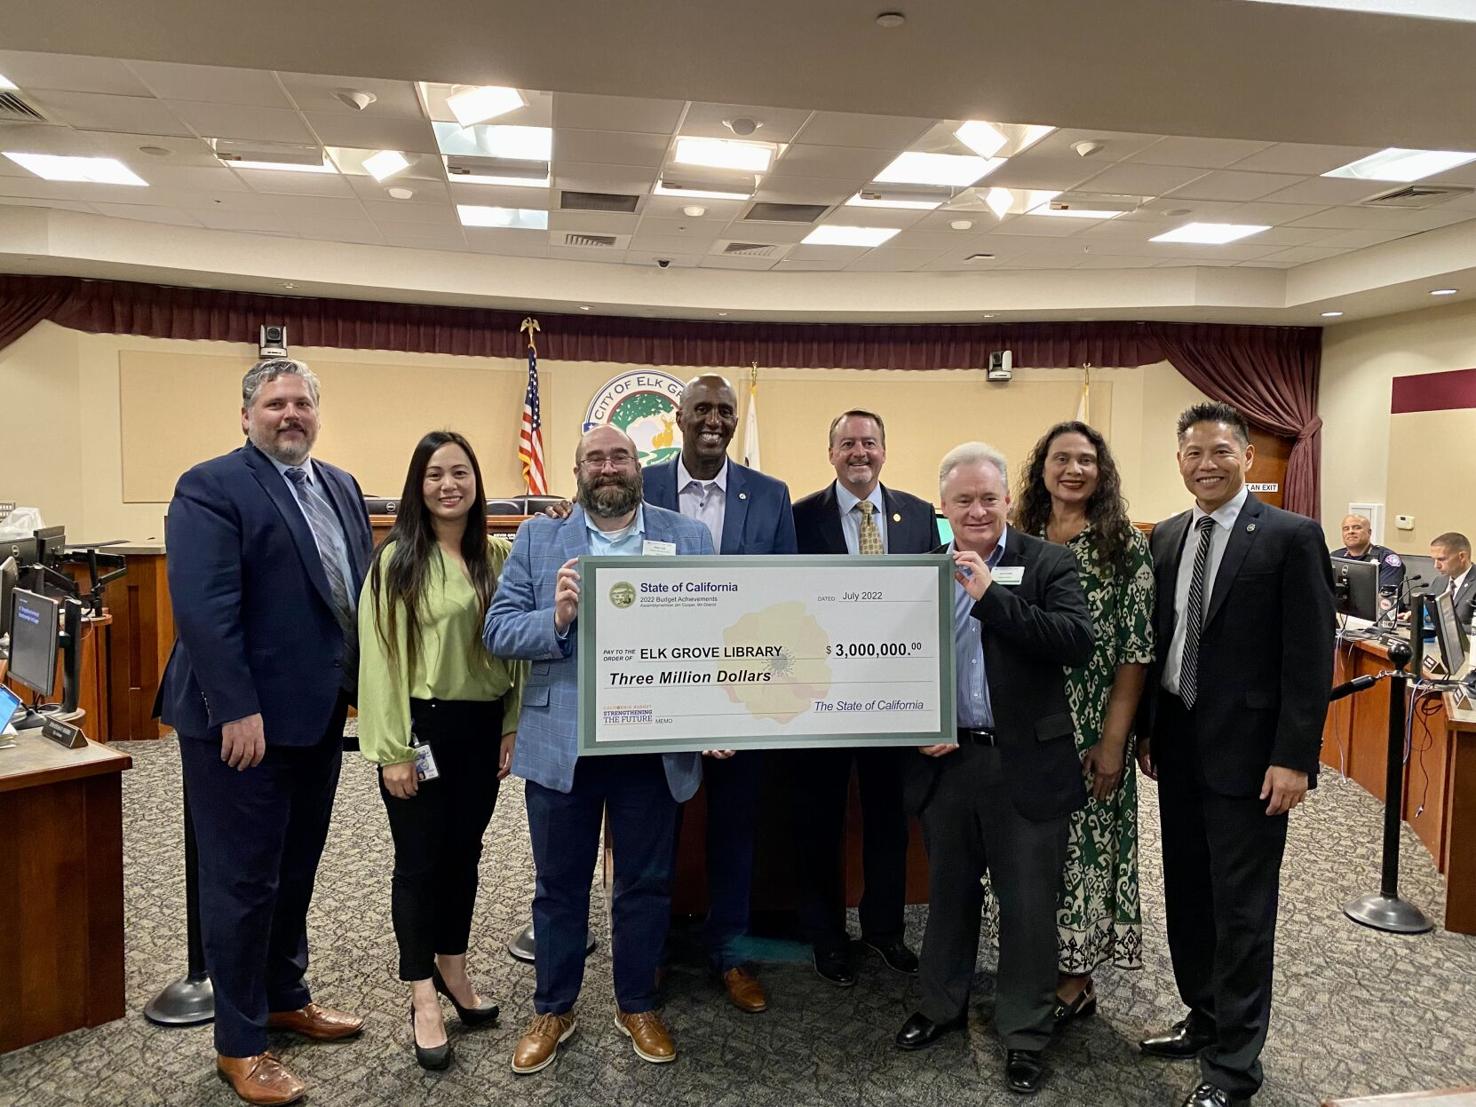 Former Councilmember Jim Cooper presents a $3 million check to the city of Elk Grove on Oct. 12. Community activist Dorothy Benjamin says no plans for an Oak Park library have materialized since the McClatchy Park Library’s closure in 1993.